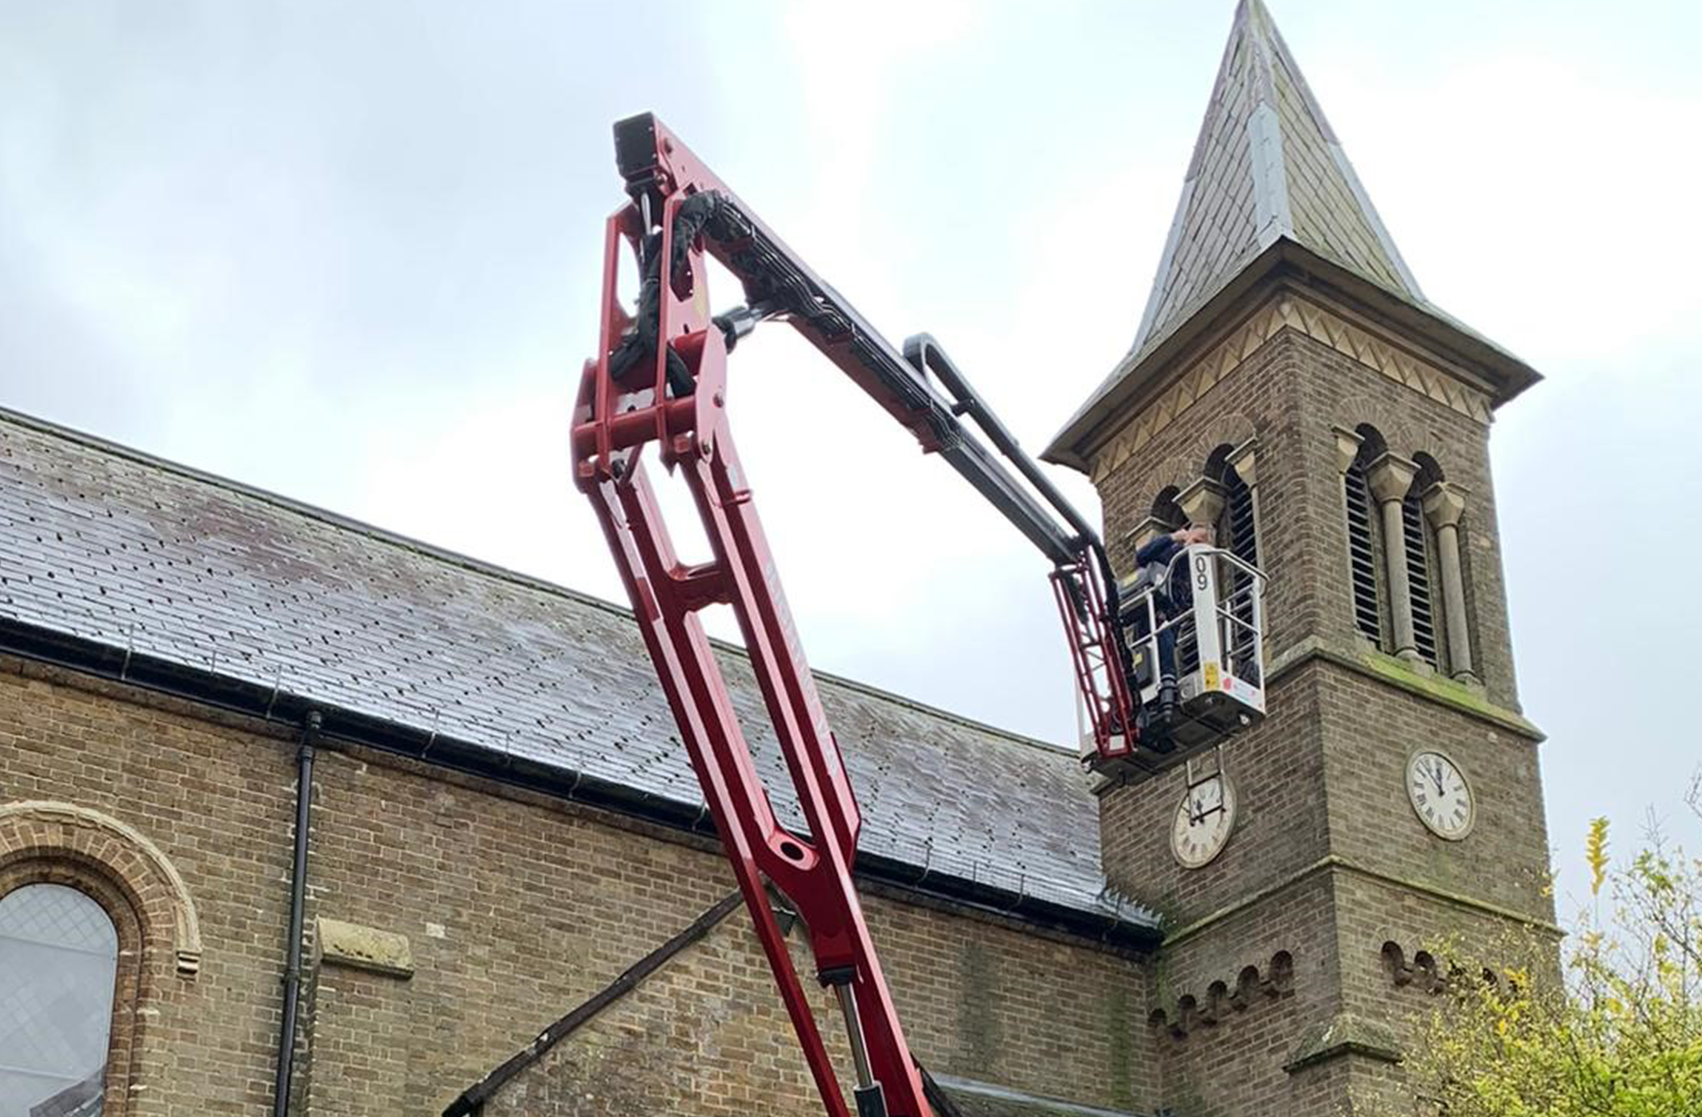 6 reasons Hinowa spider lifts are ideal for working in church grounds